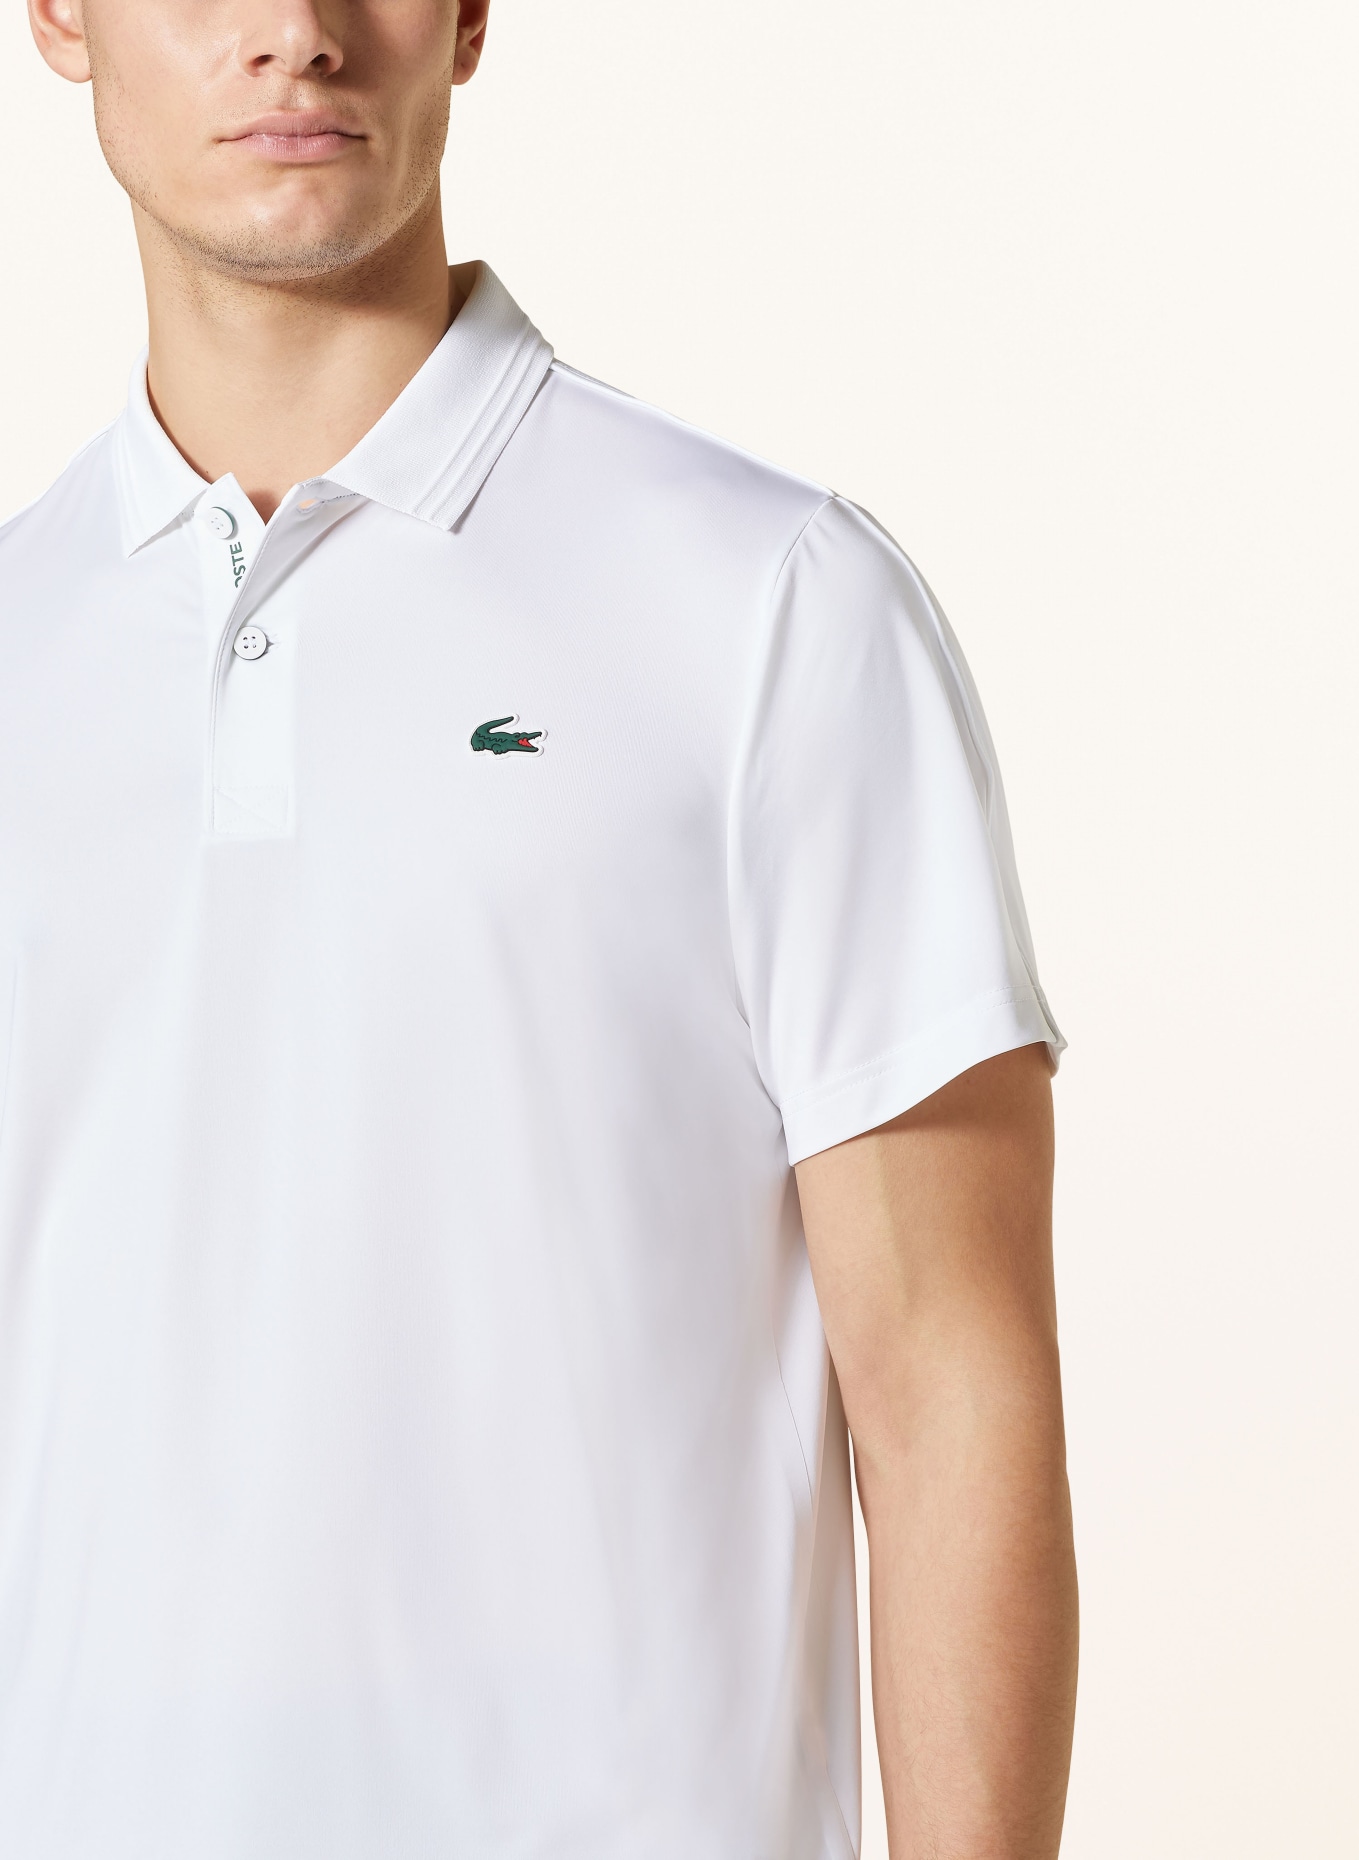 LACOSTE Funktions-Poloshirt, Farbe: WEISS (Bild 4)